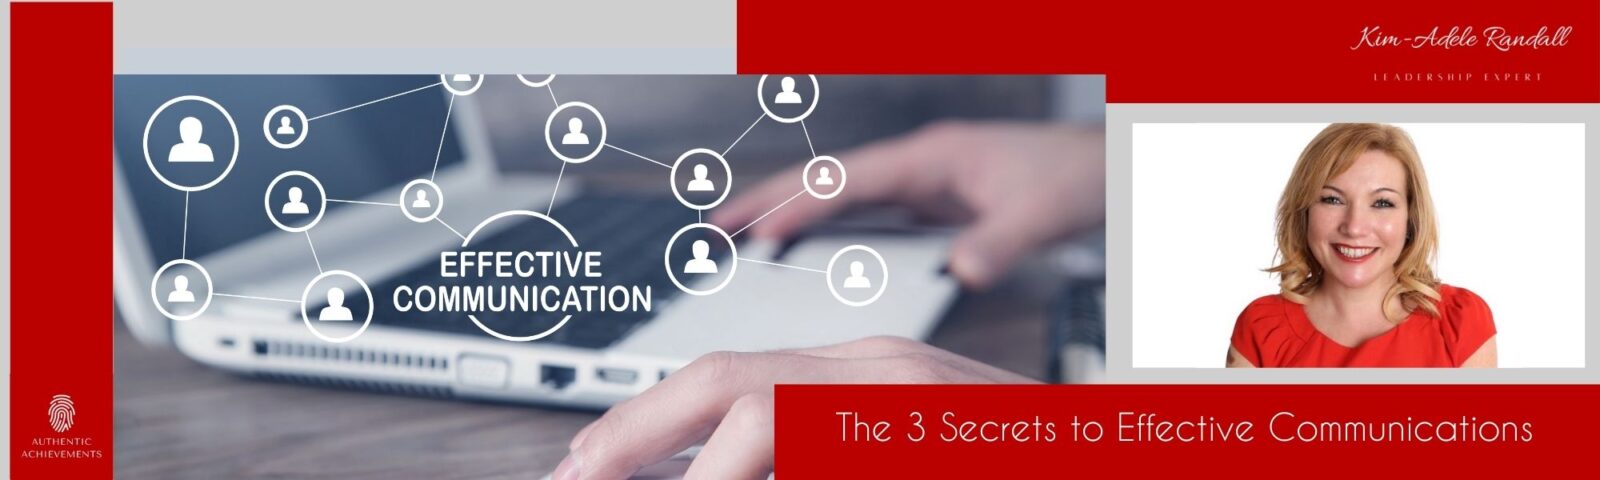 The 3 Secrets to Effective Communications